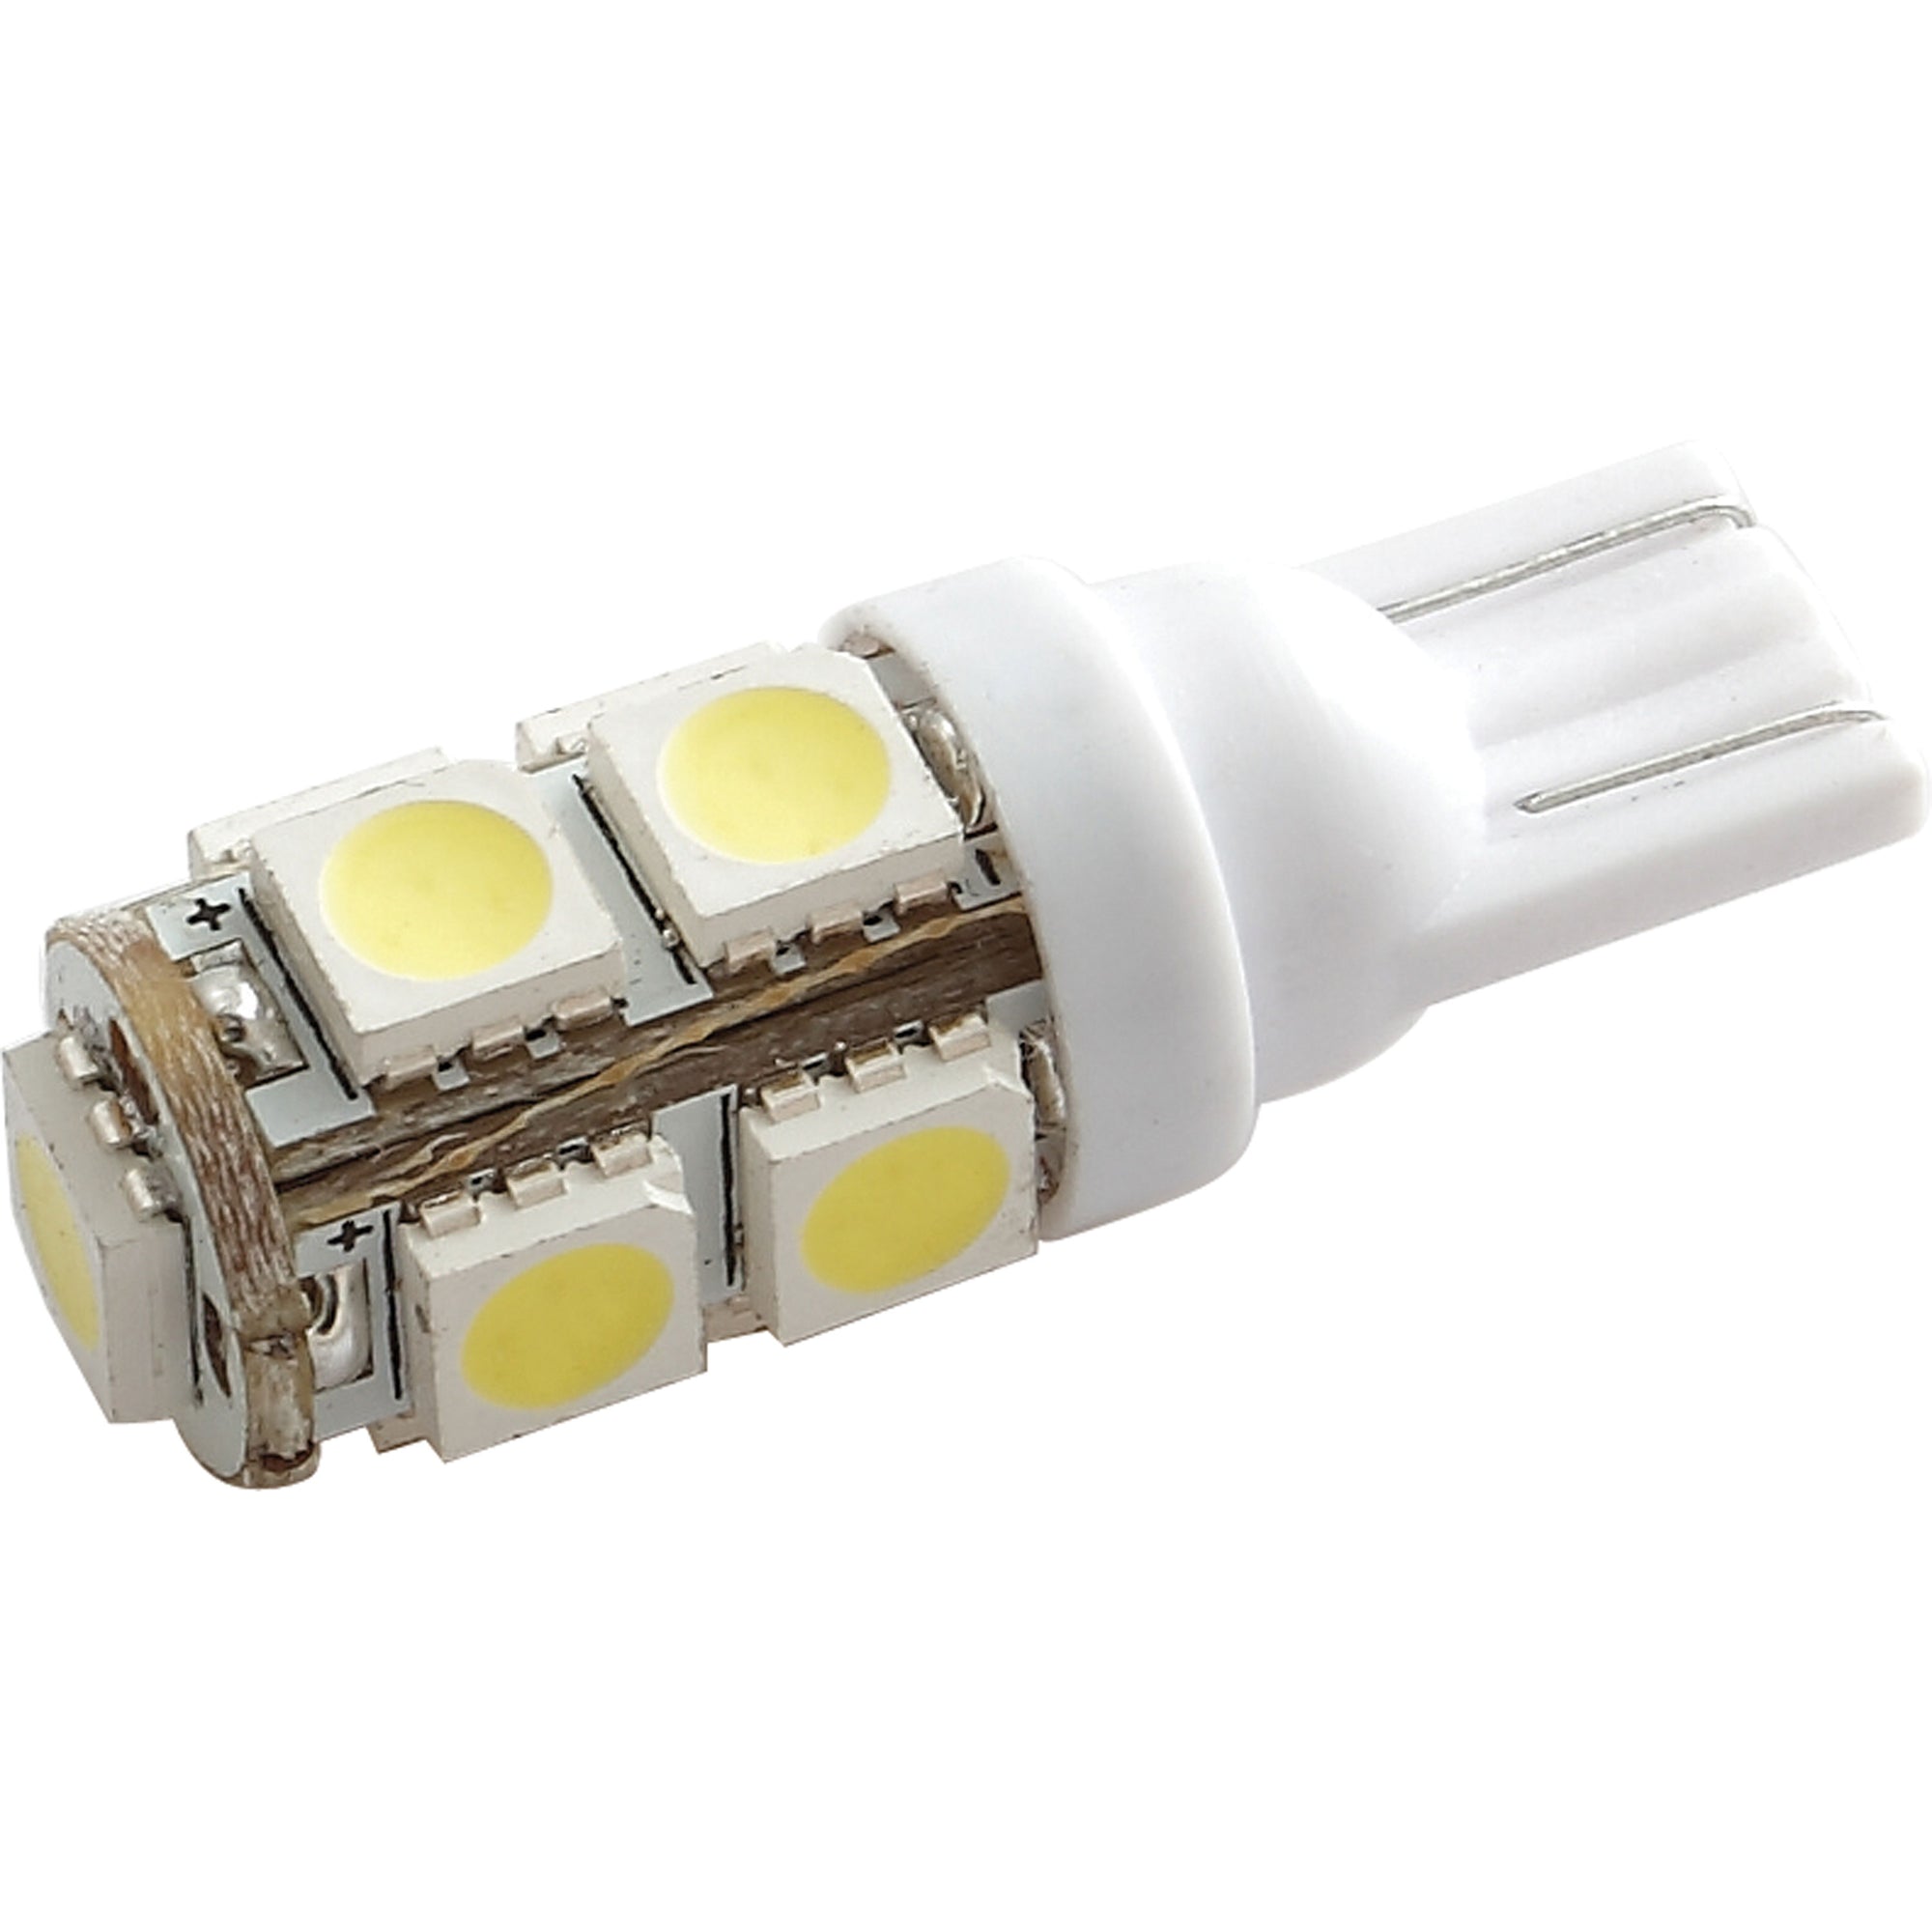 Ming's Mark 5050113 Green LongLife 12V LED Tower Bulb with 194 / T10 Base - 100 Lumens, Warm White